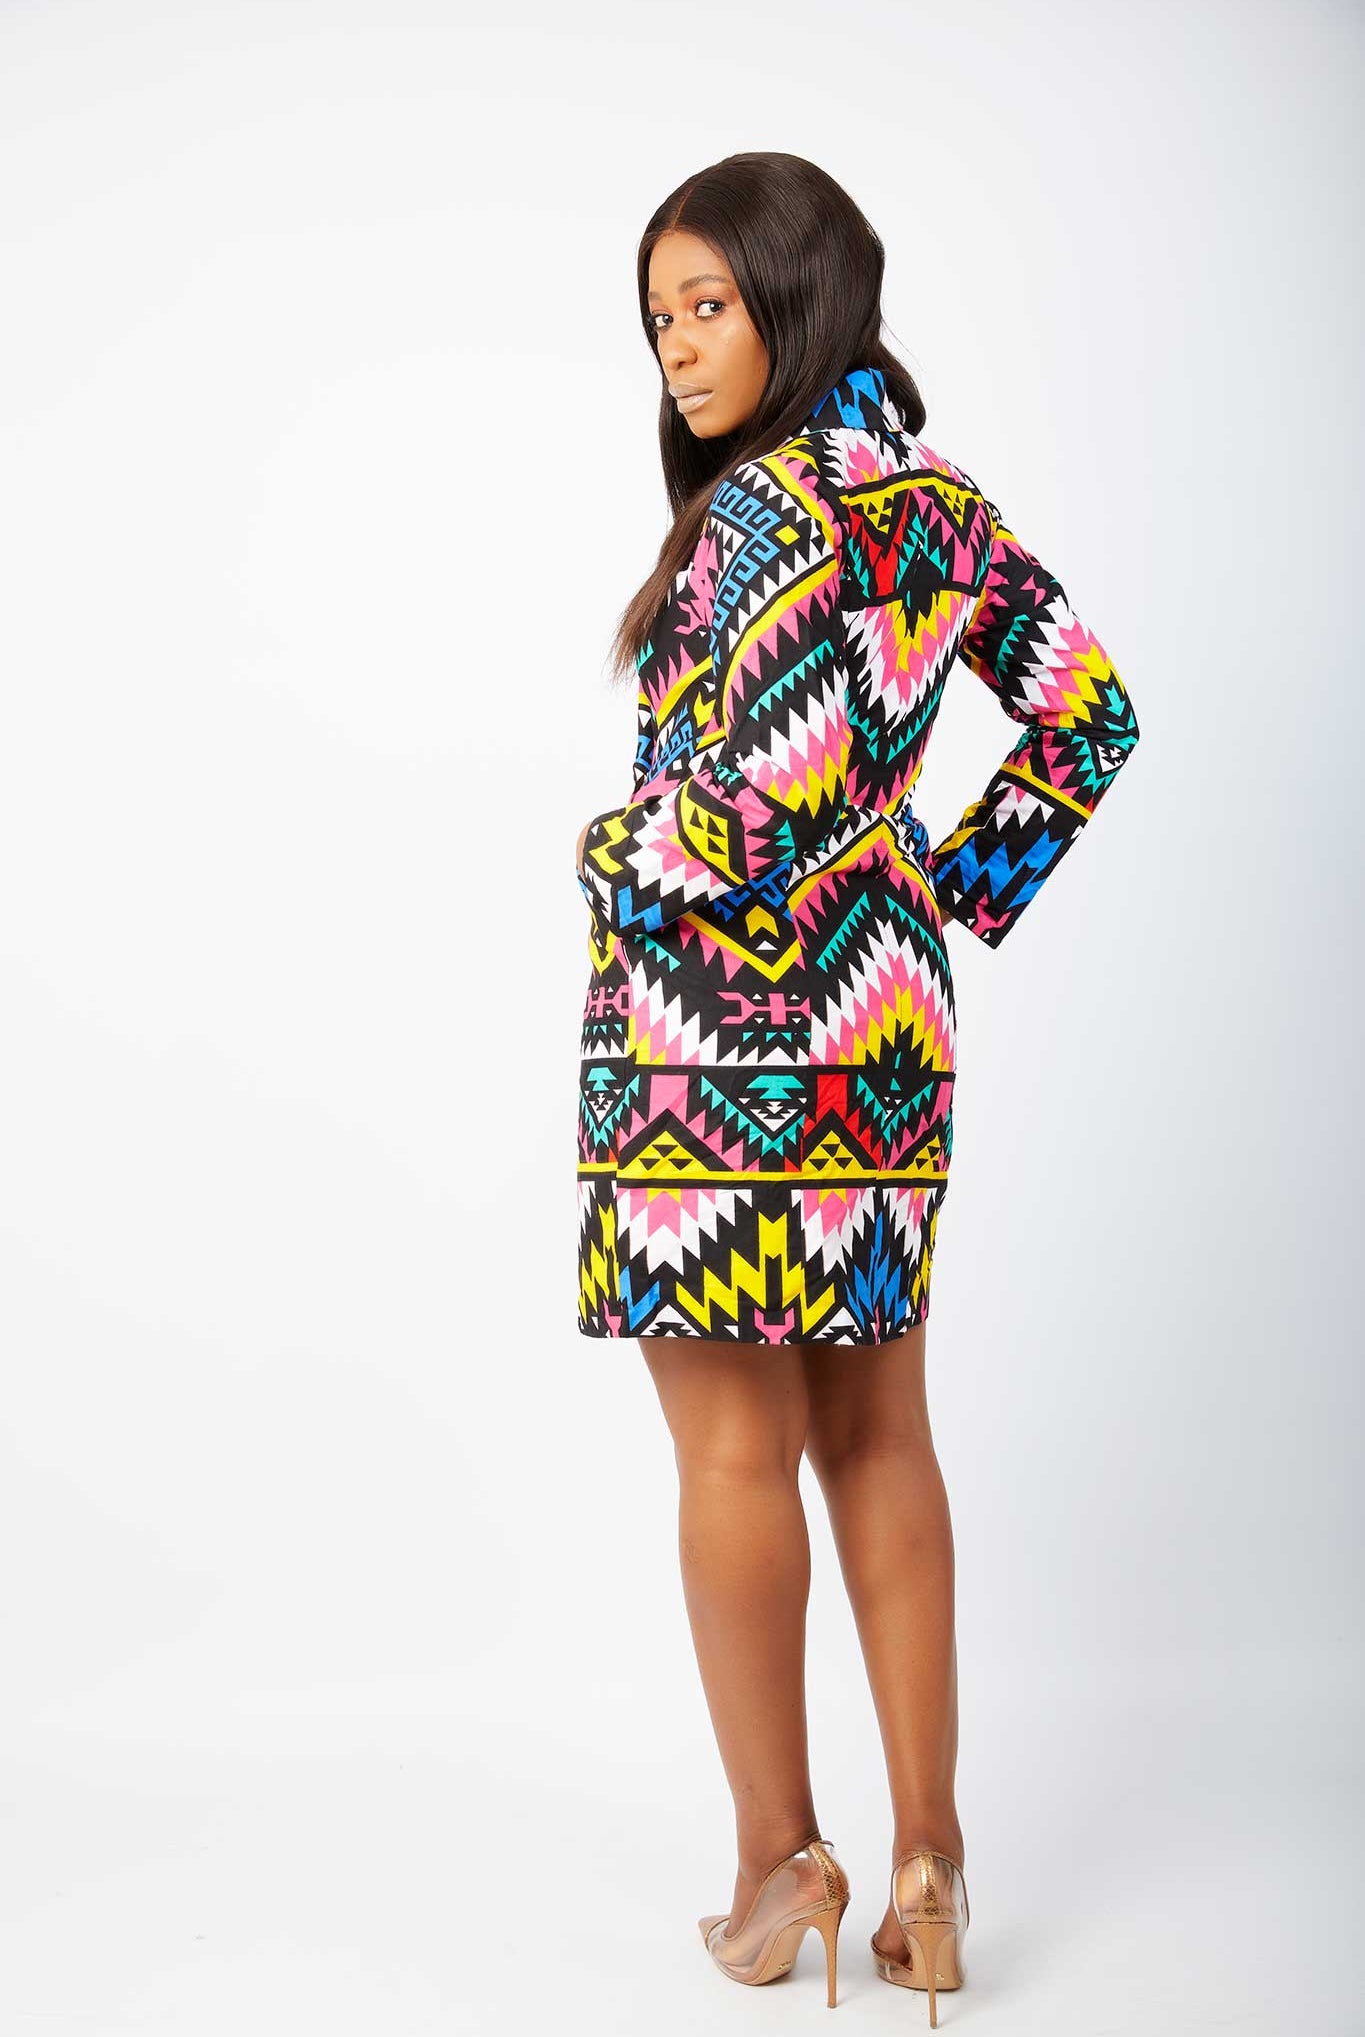 Blazer dress | African print work dress |  African dress for plus size women | African print clothing in the UK | Ready to wear African print outfits | African dress styles | African clothing | african outfit | kitenge dresses | Africa Dresses for Women | Ankara Styles for ladies | African dresses for work | Danshiki Dress | Ghana African dress | Kente Dress | African dress | African print Dress | African Clothing Online Shop | Short African dress | Mini African dress UK | African dress UK